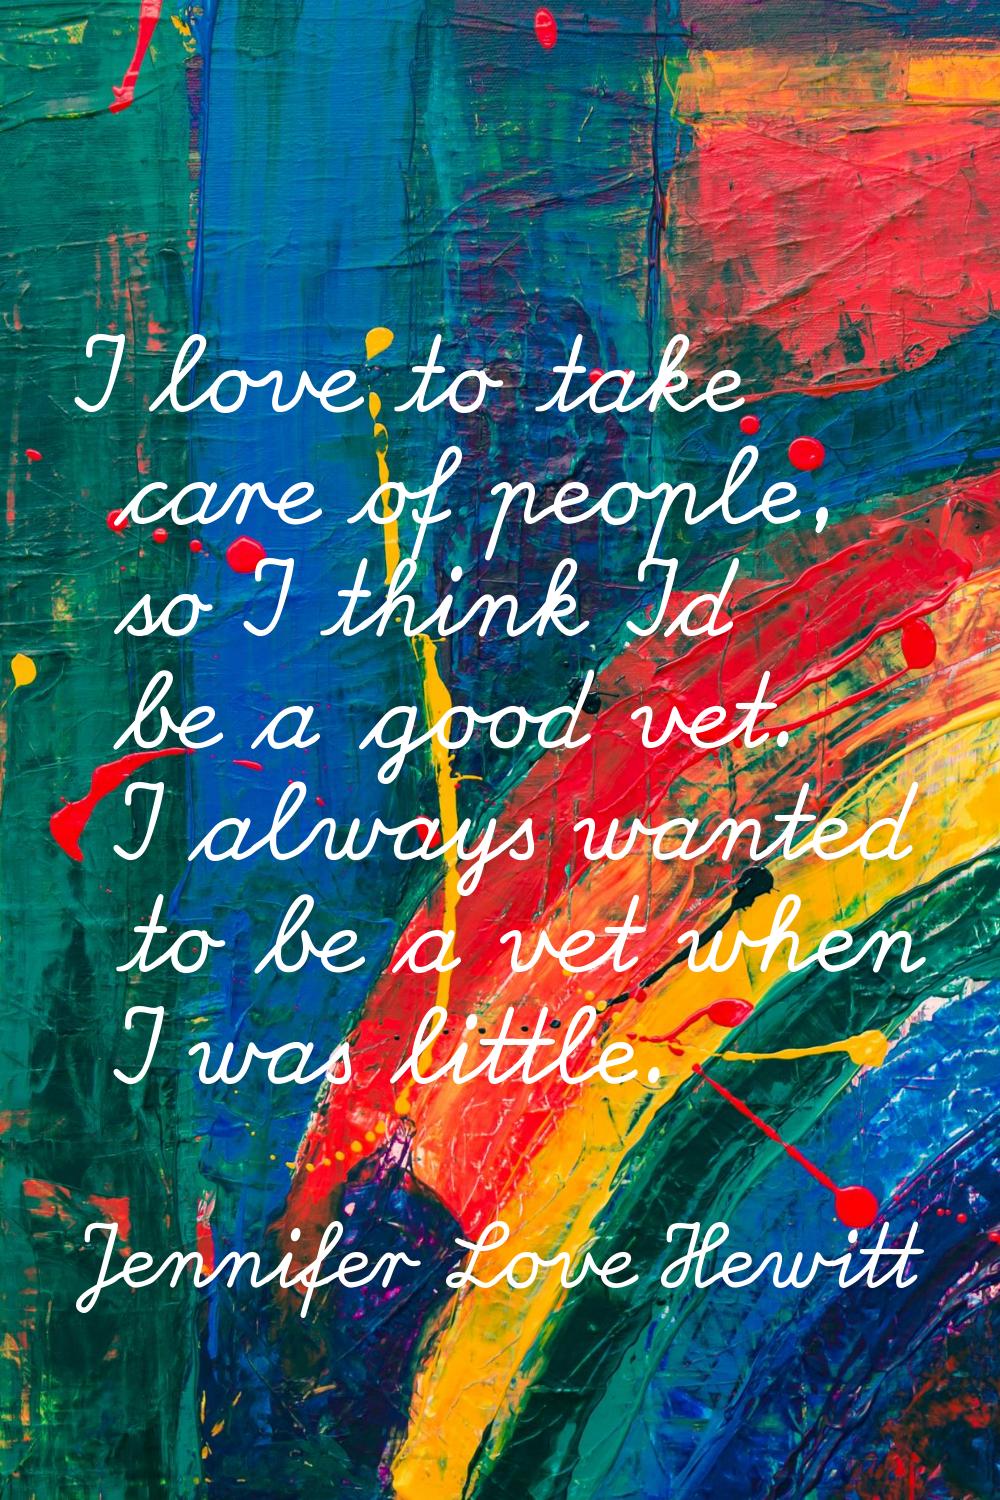 I love to take care of people, so I think I'd be a good vet. I always wanted to be a vet when I was